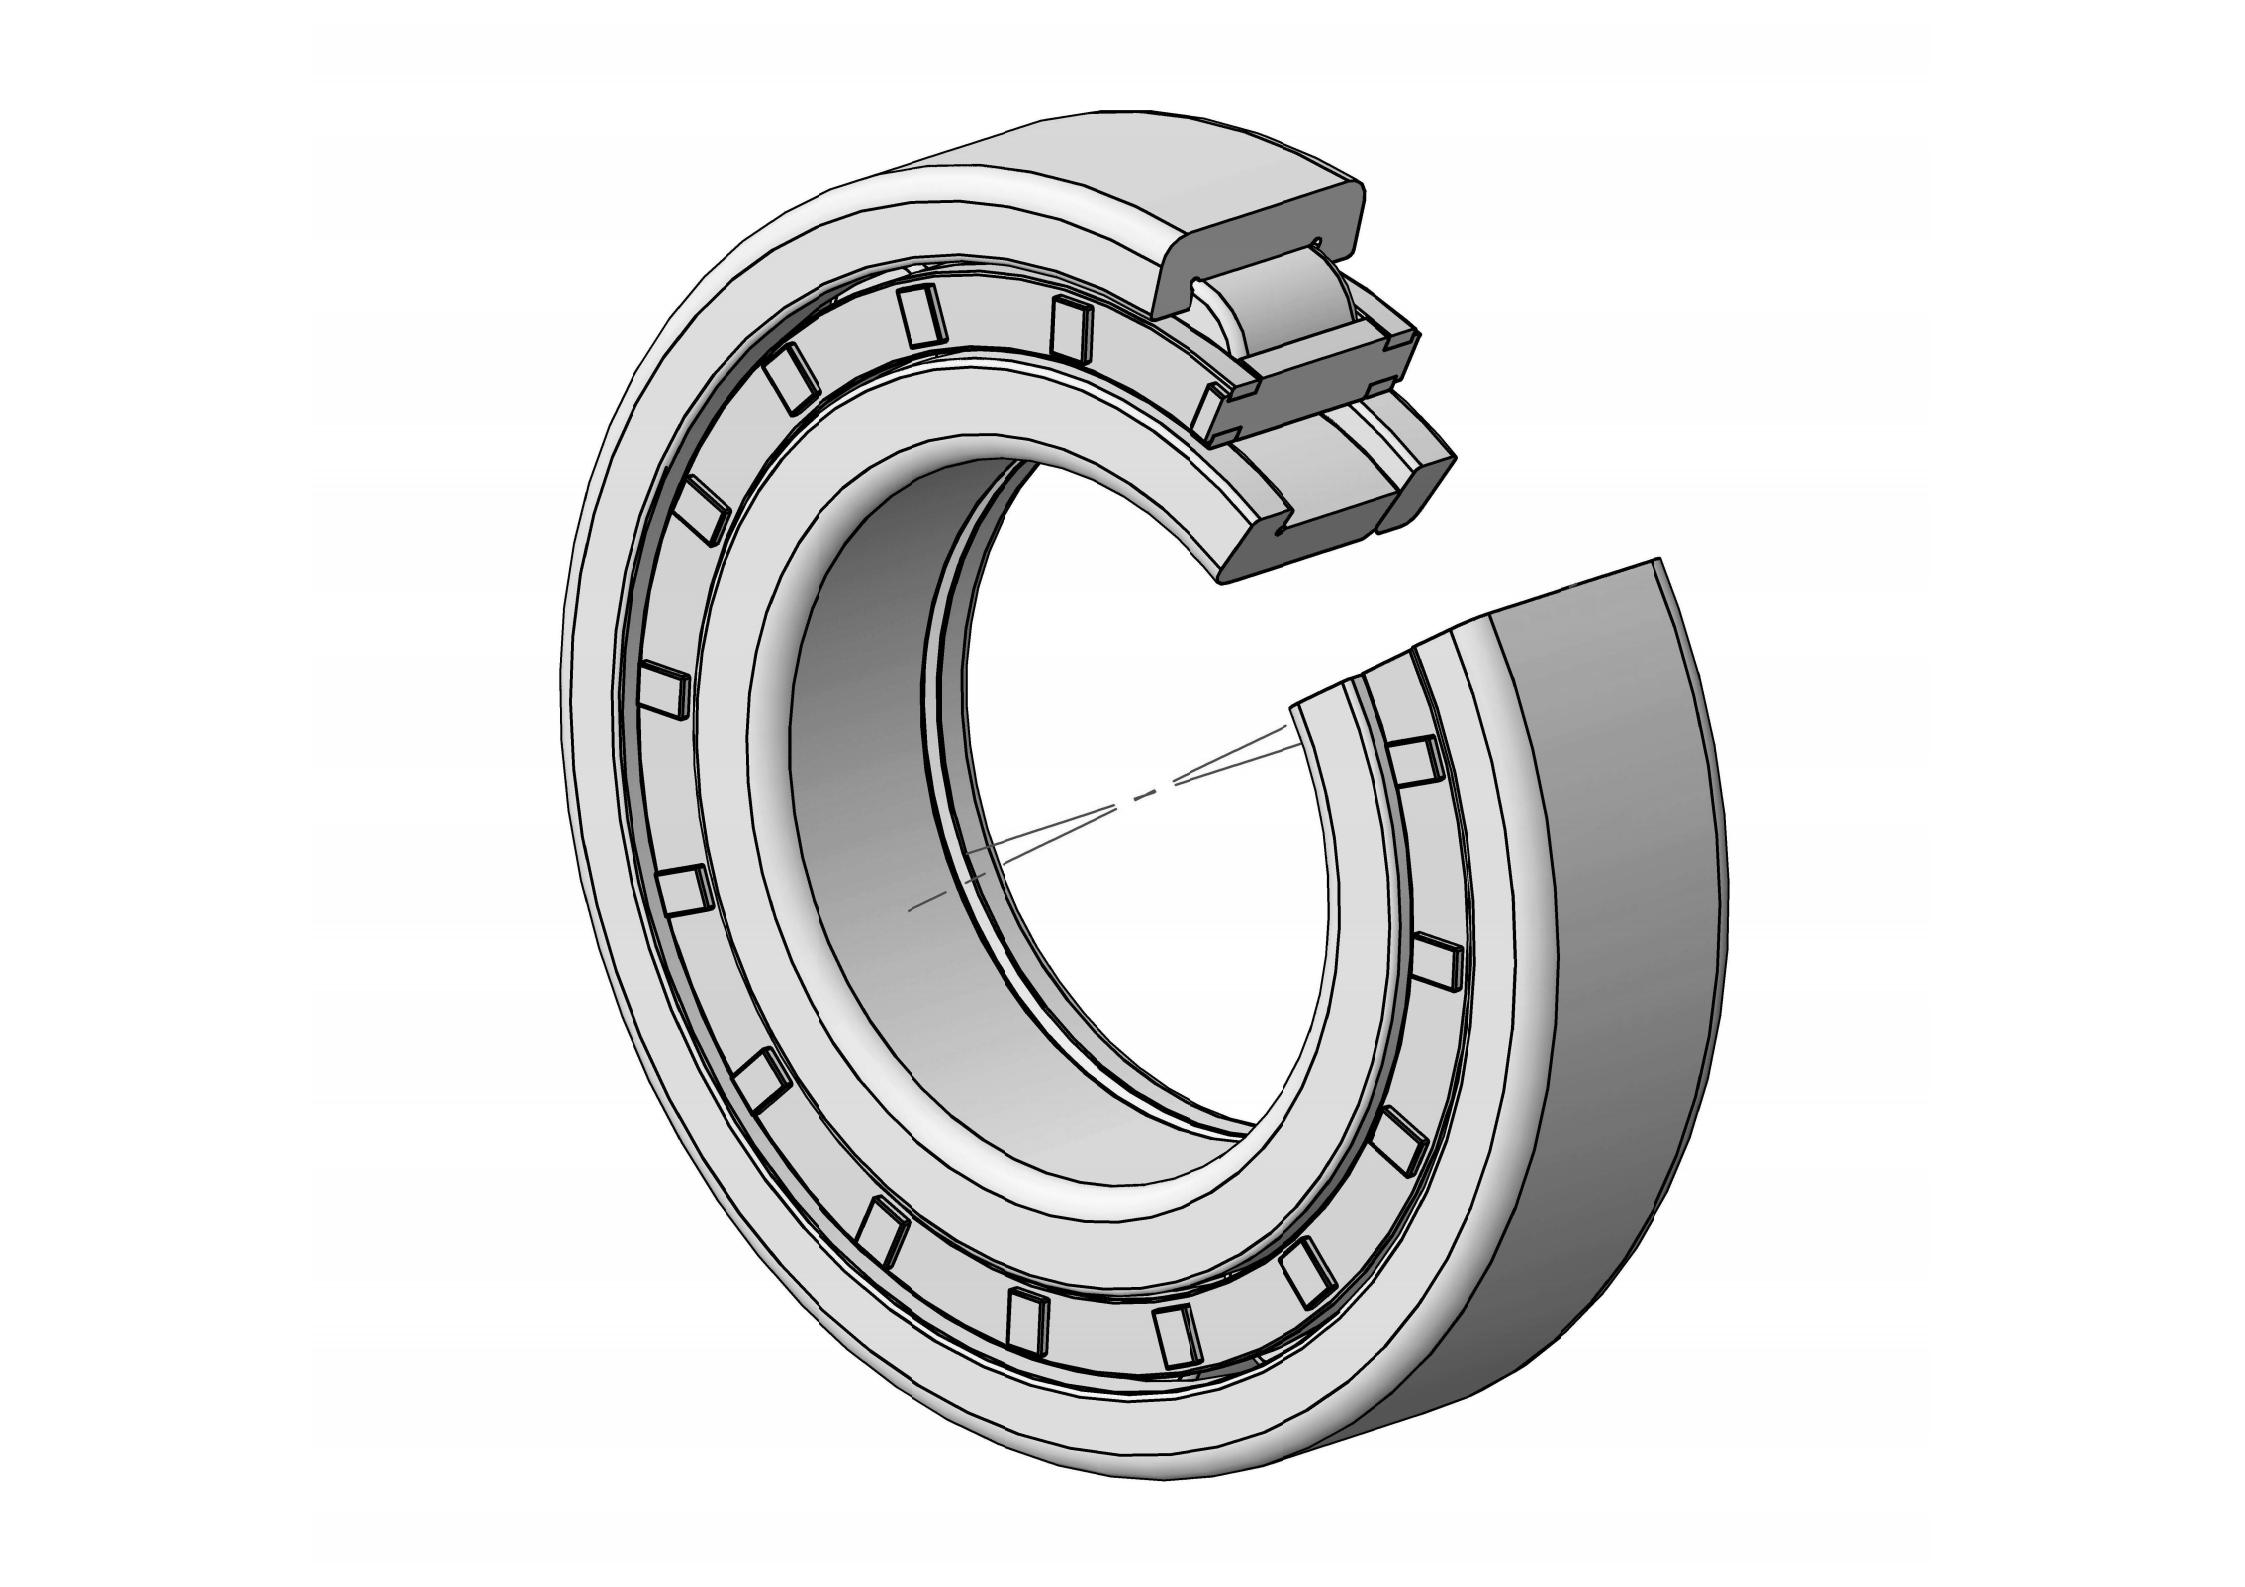 NUP2211-E Single Row Cylindrical roller bearing 